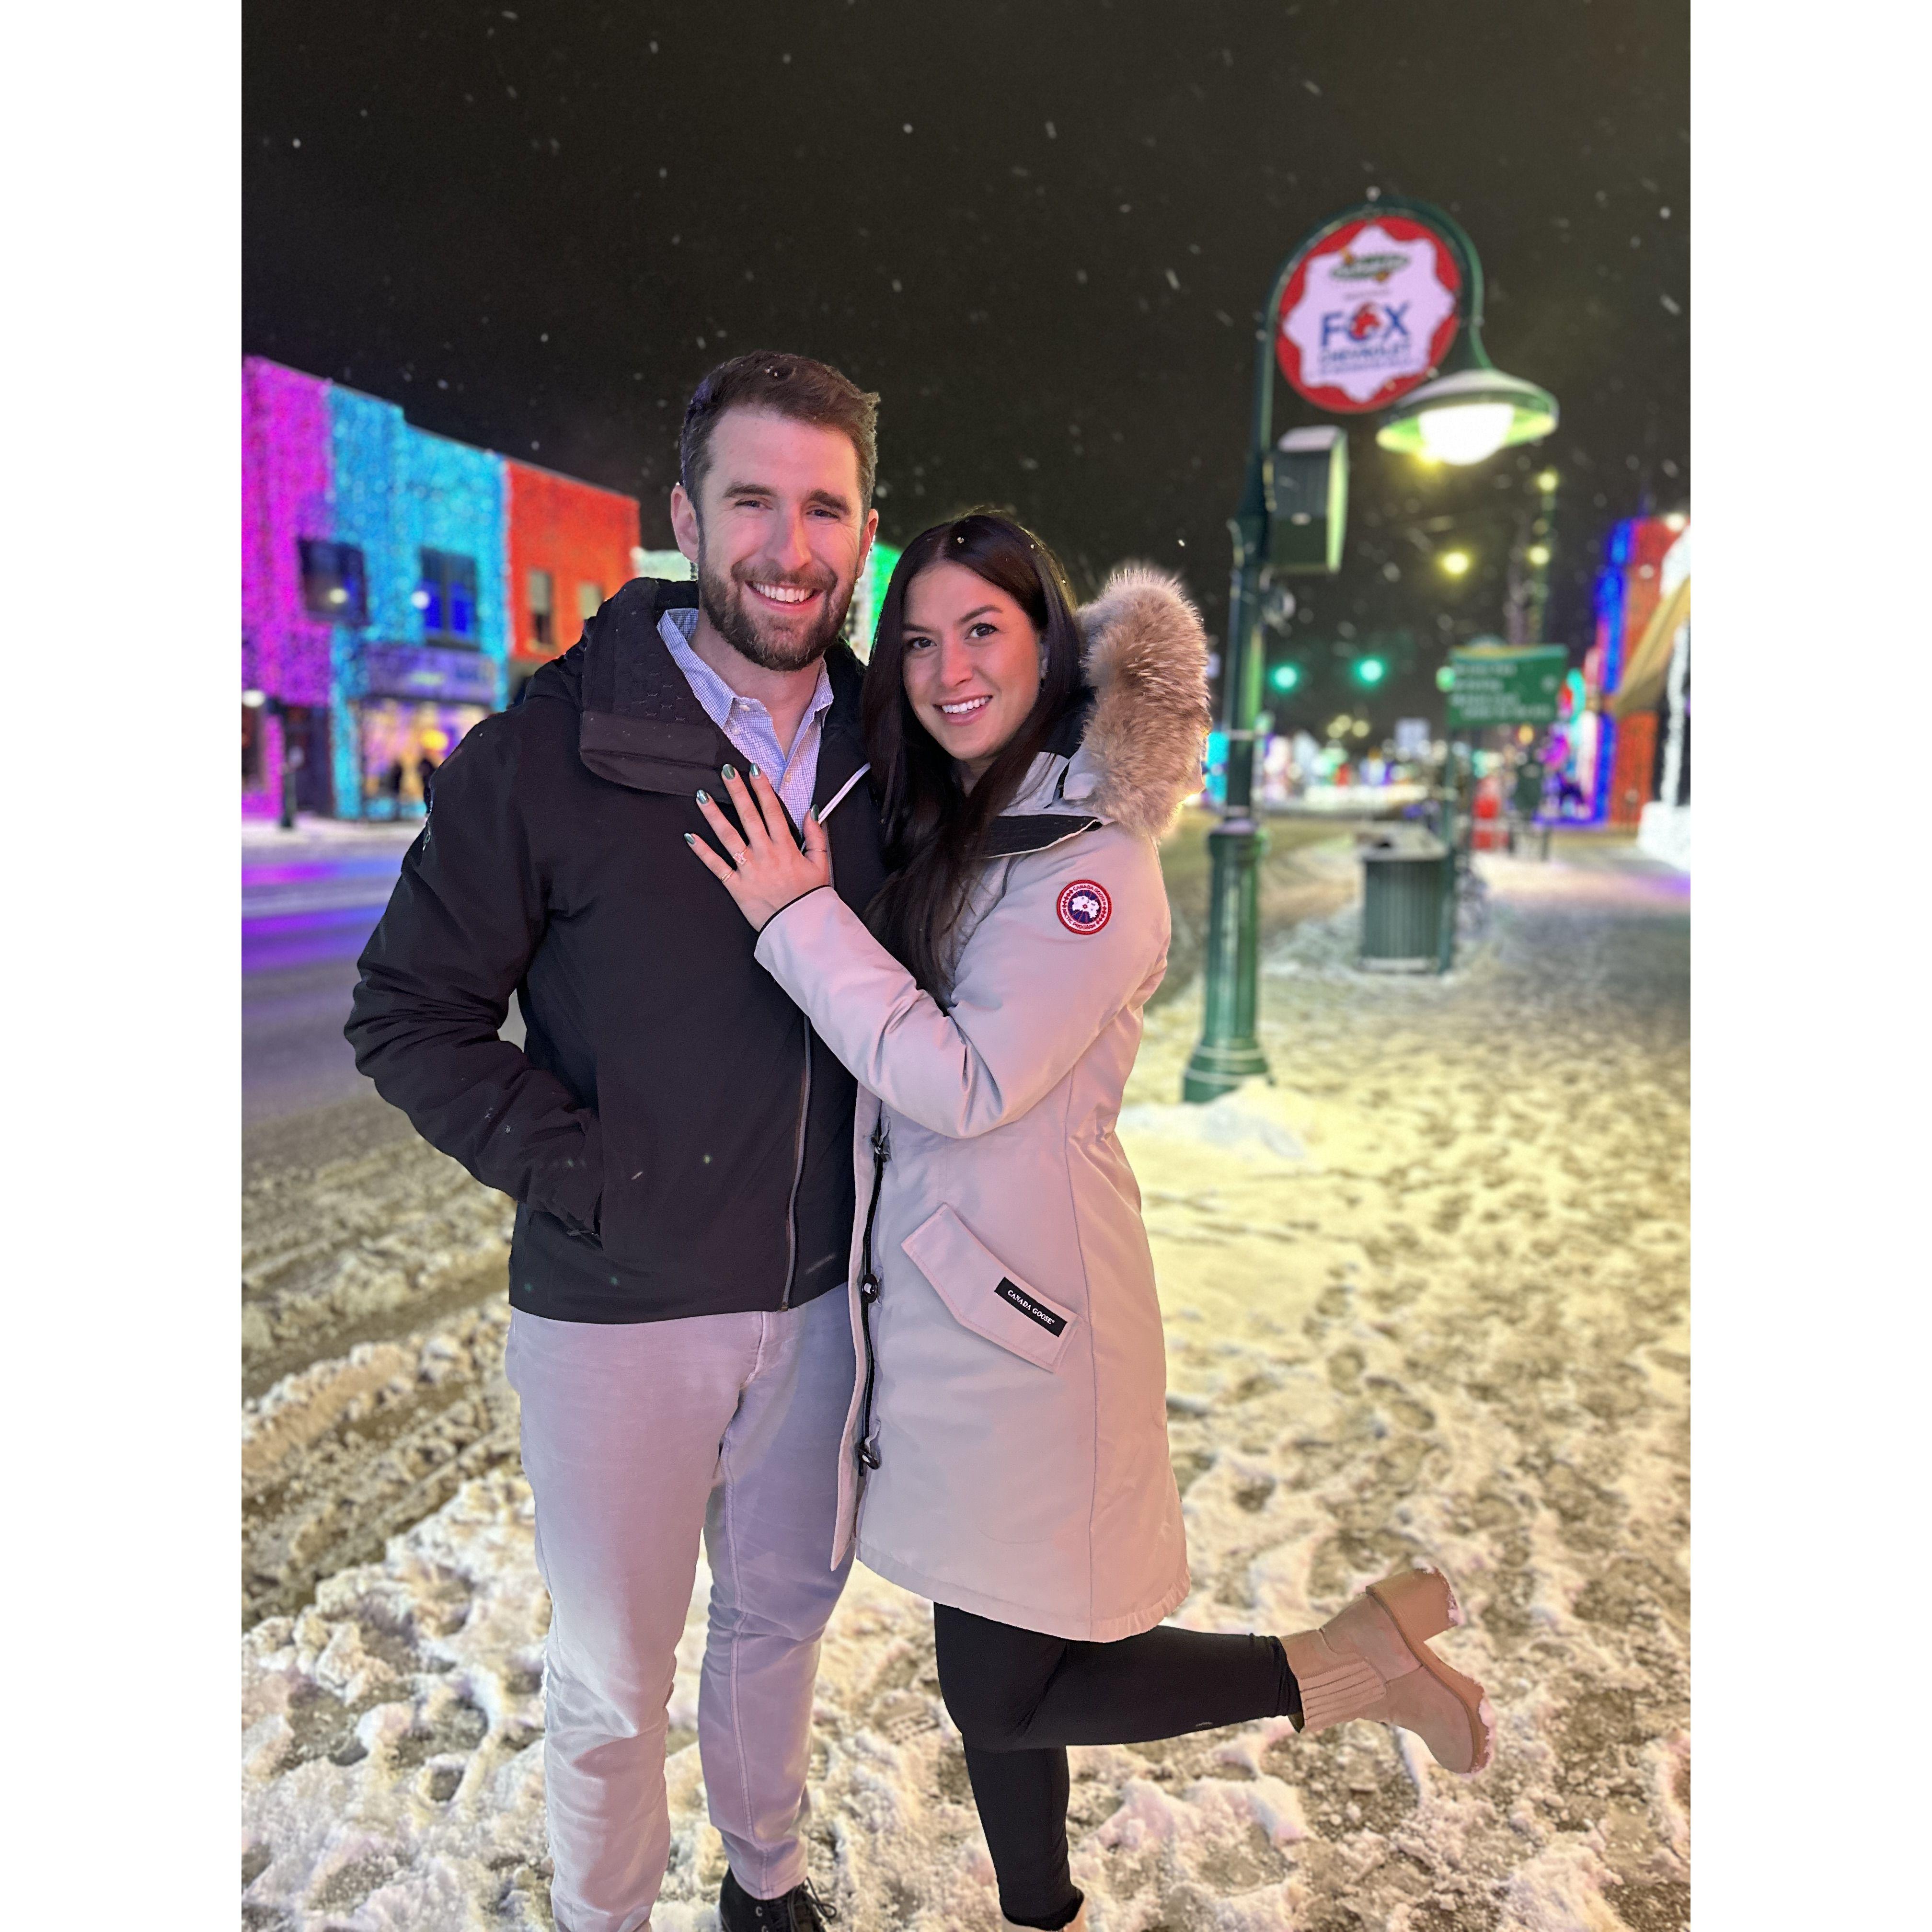 December 2022: Xmas Engagement, Good thing Kevin made it in with all of the snow!